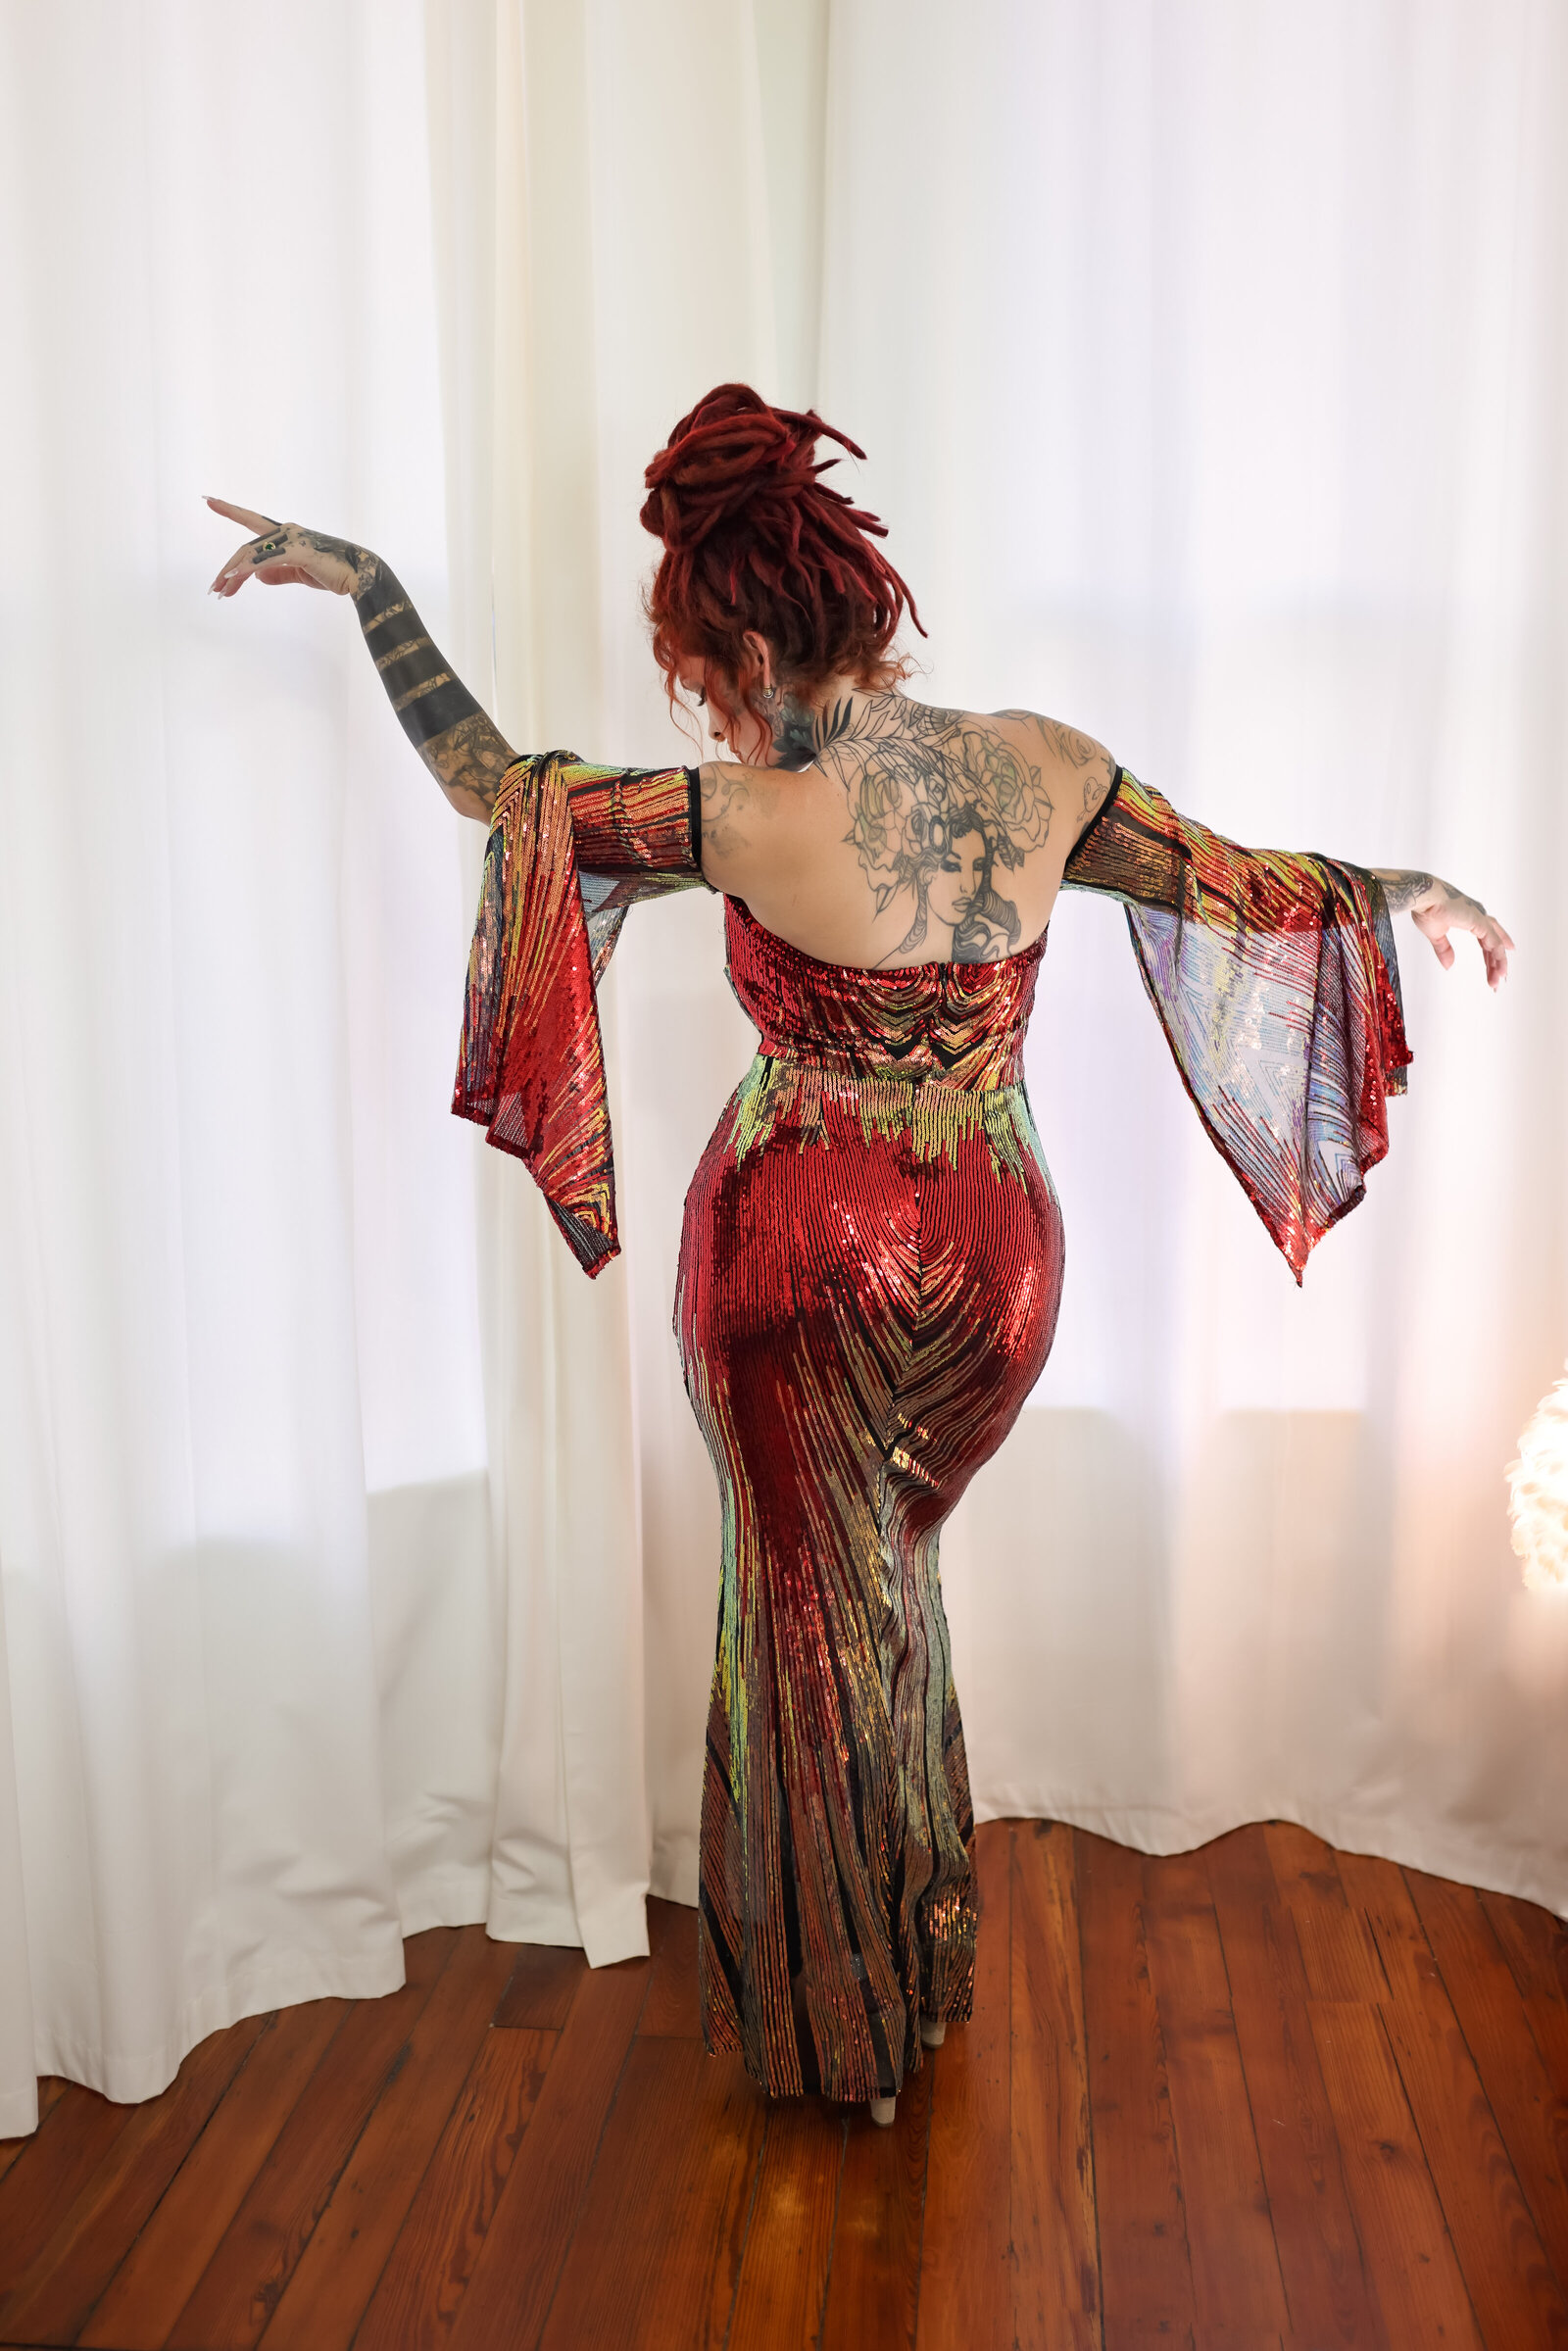 Savannah Boudoir Photography and Glamour showcases gorgeous red headed woman with dreads in colorful and sparkly designer glamour gown in window